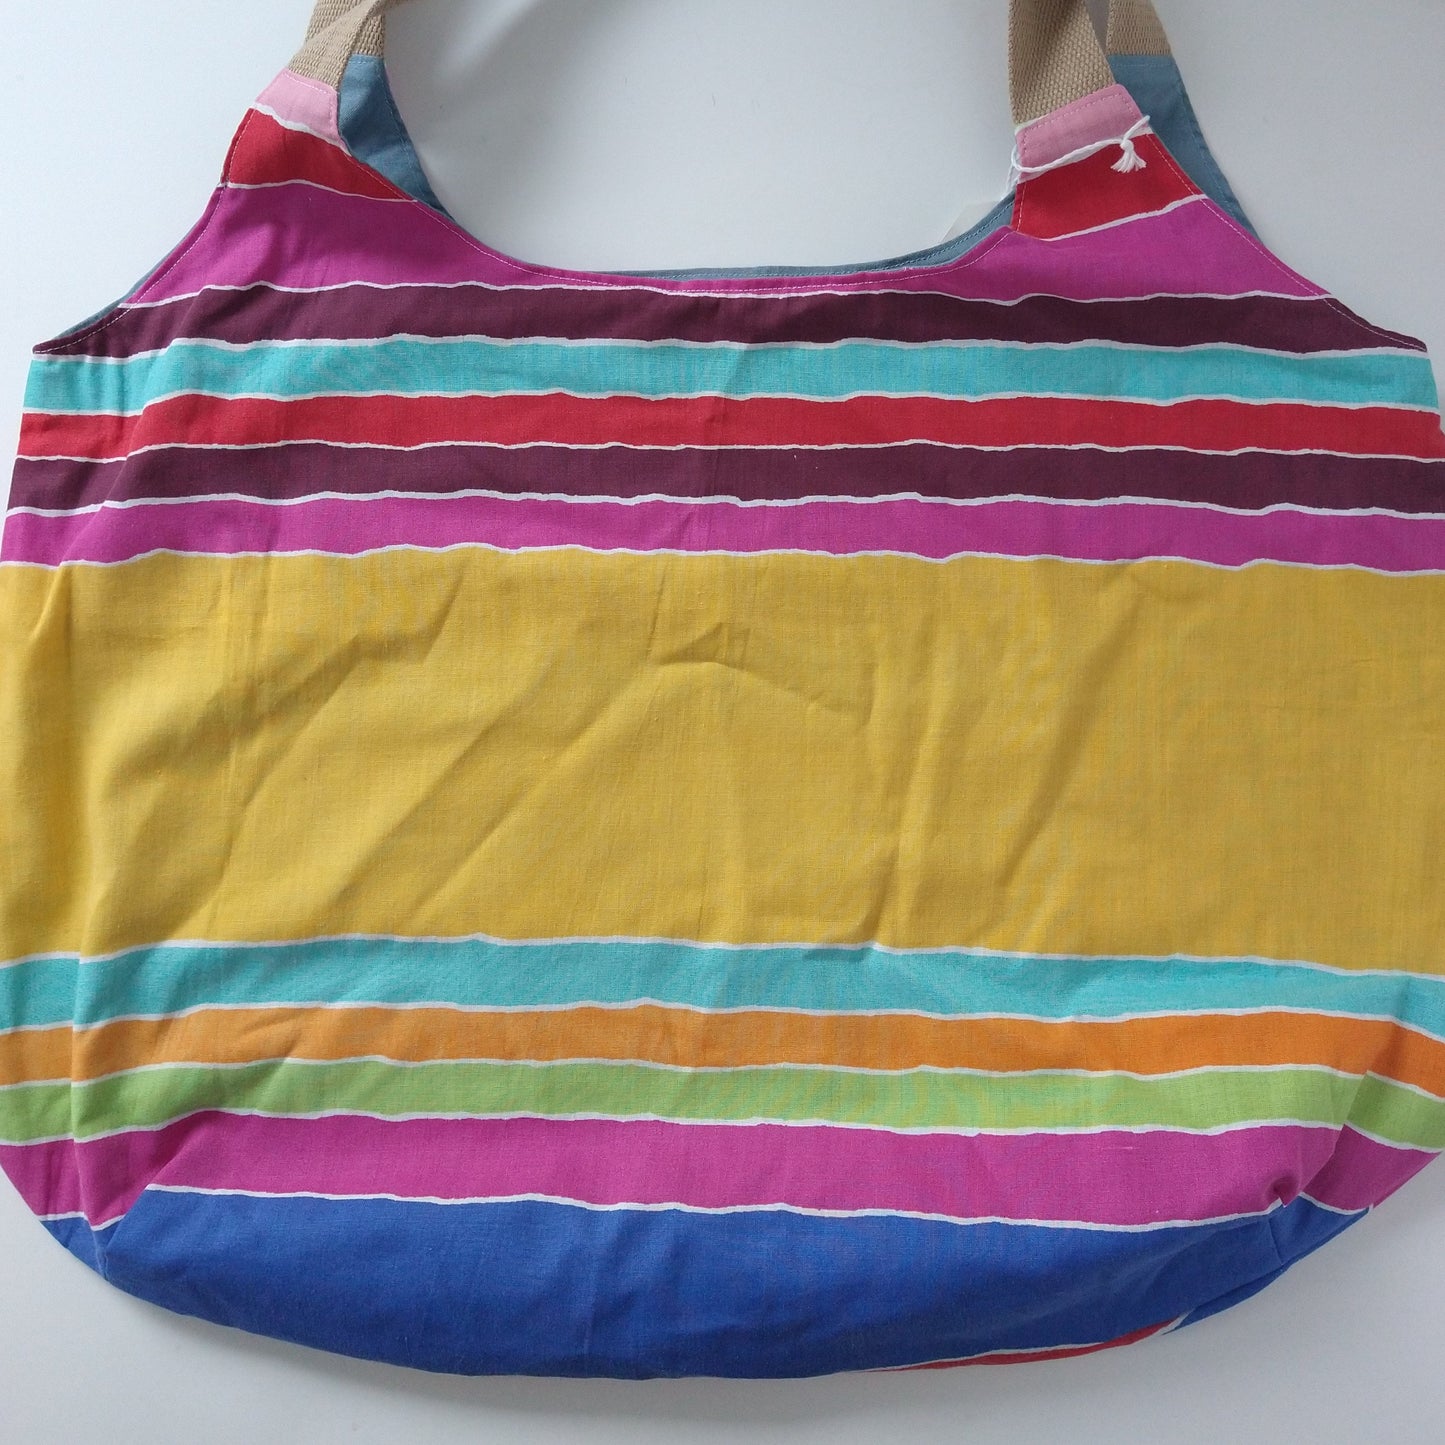 Shopping/beach bag, reversible, size large, multistripes blue (Handmade in Canada)